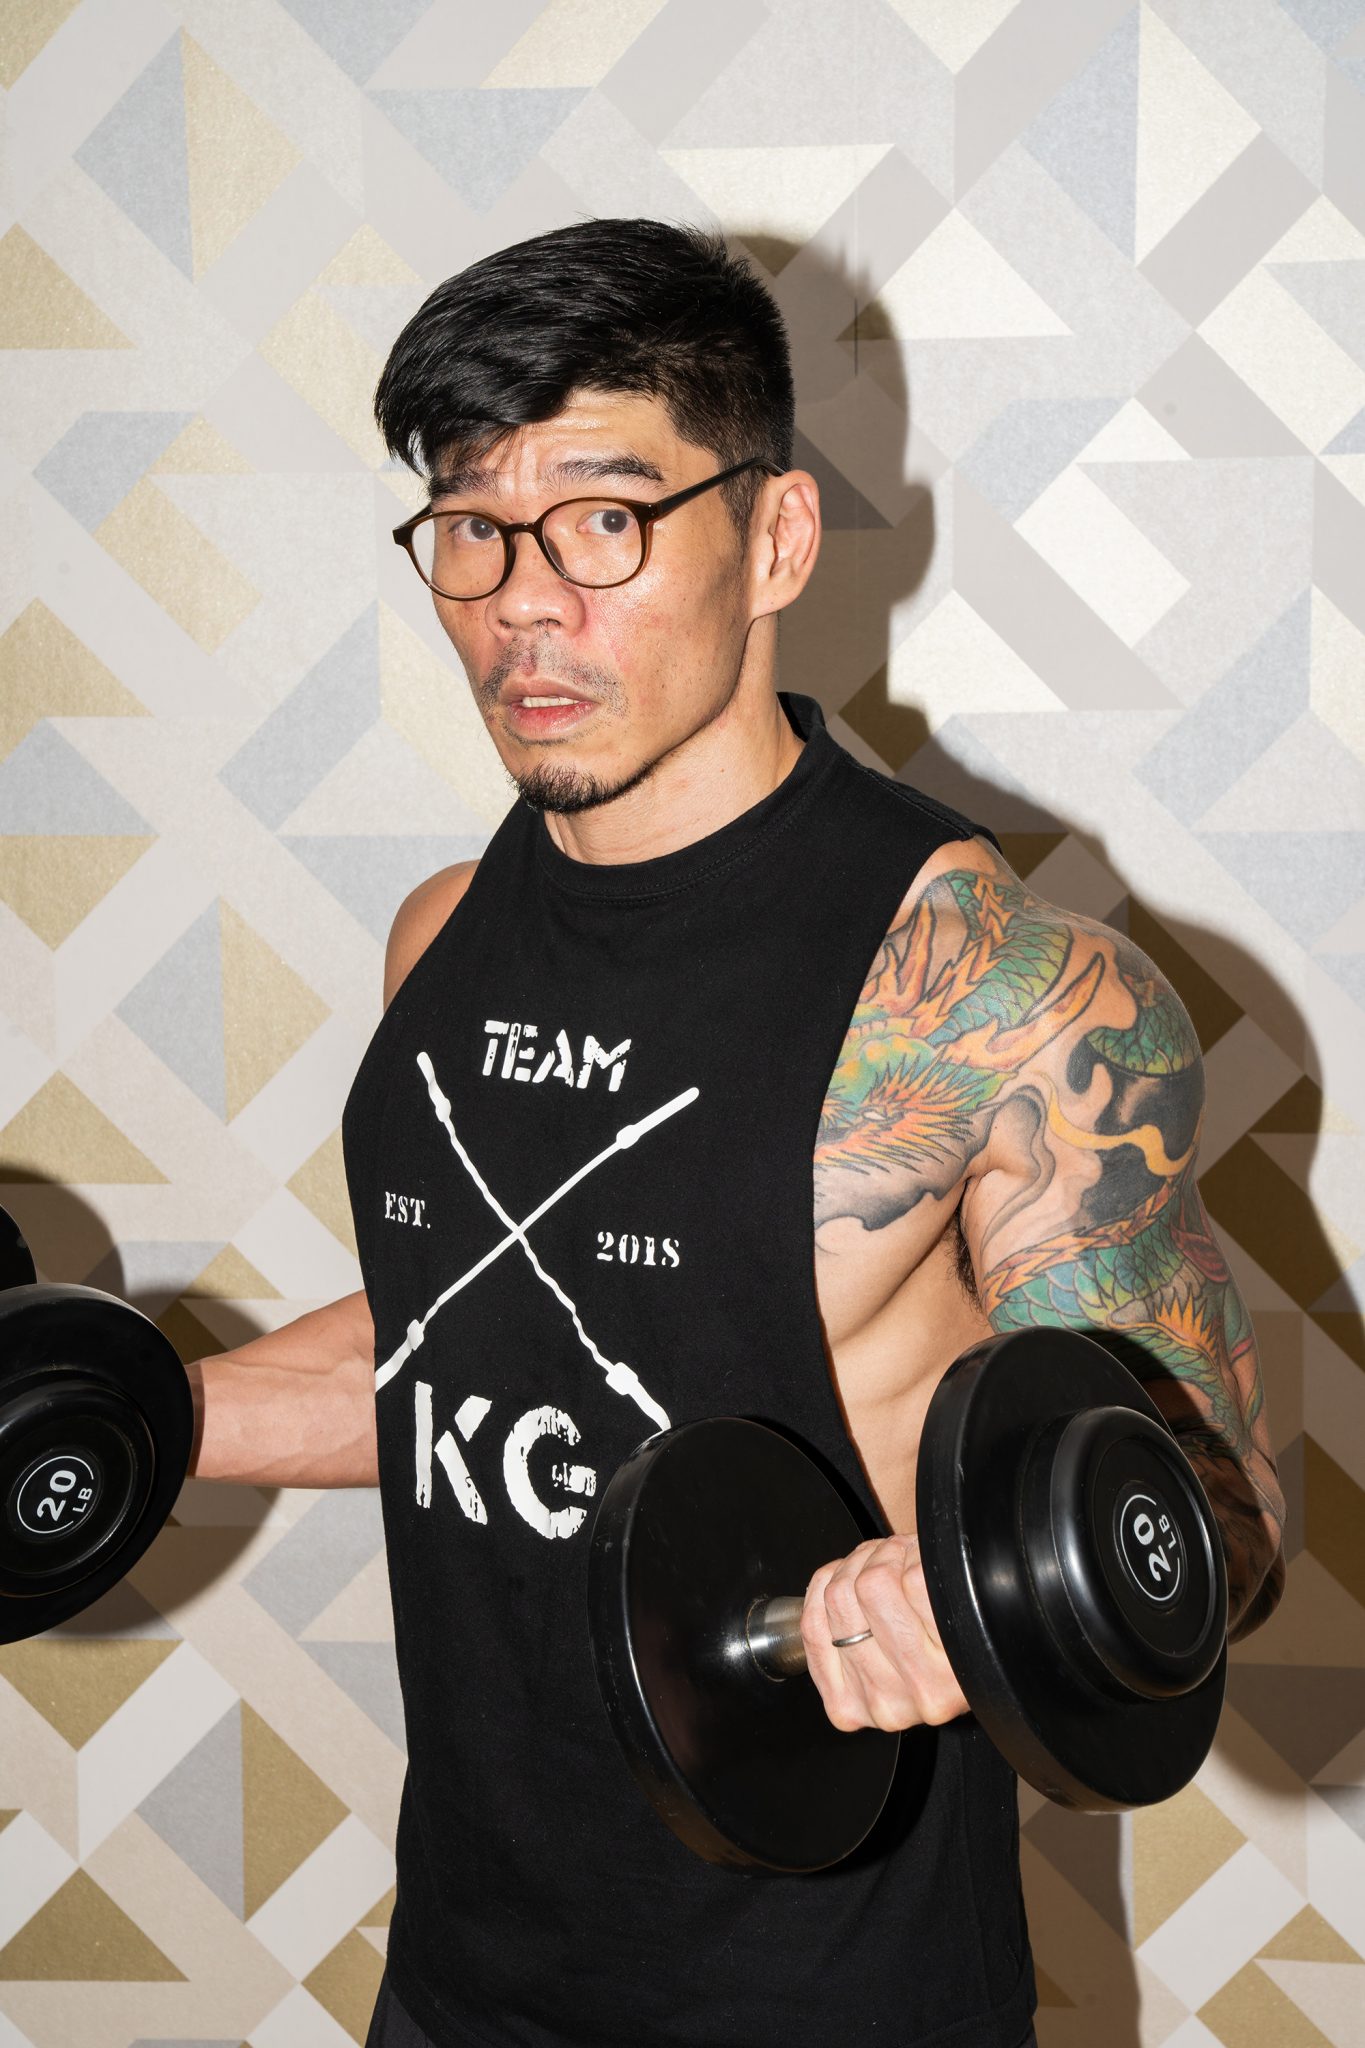 On balancing his job as a chef and passion for fitness: If you really want something and you are serious about it, you find a way to fit it in your schedule